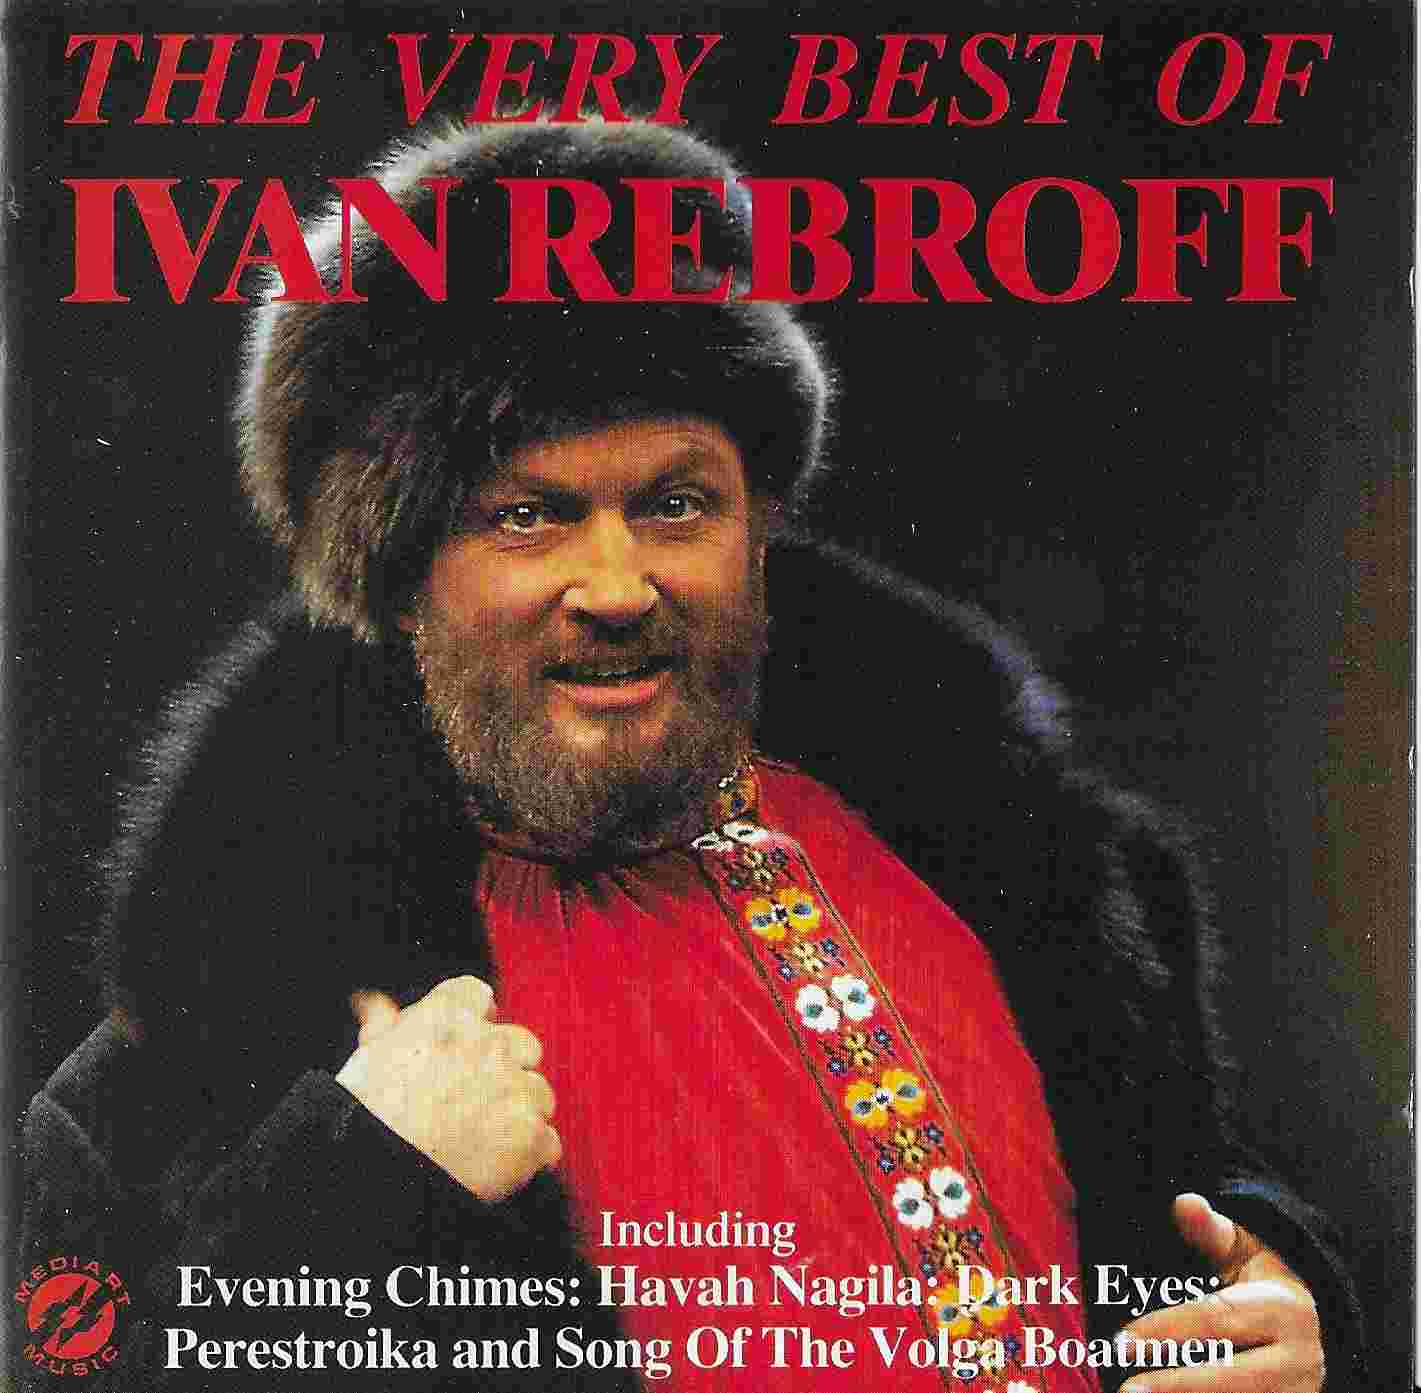 Picture of MDMCD 001 The very best of Ivan Rebroff by artist Various 